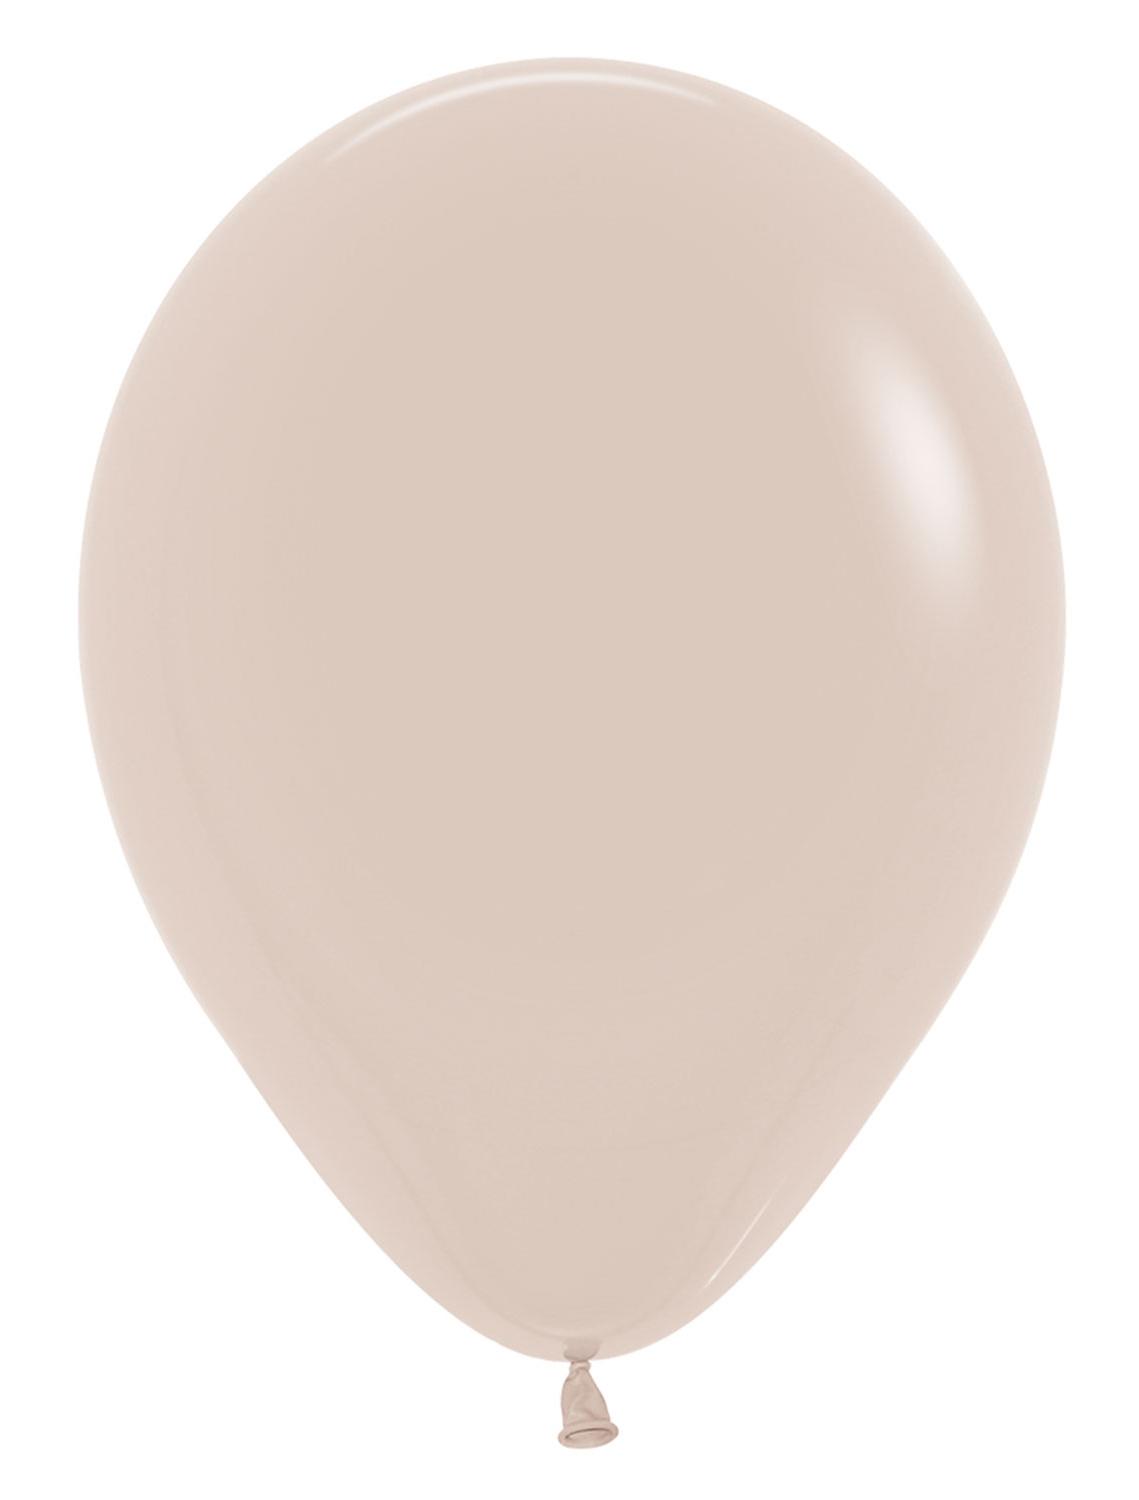 Fashion Latex Balloons Solid White Sand